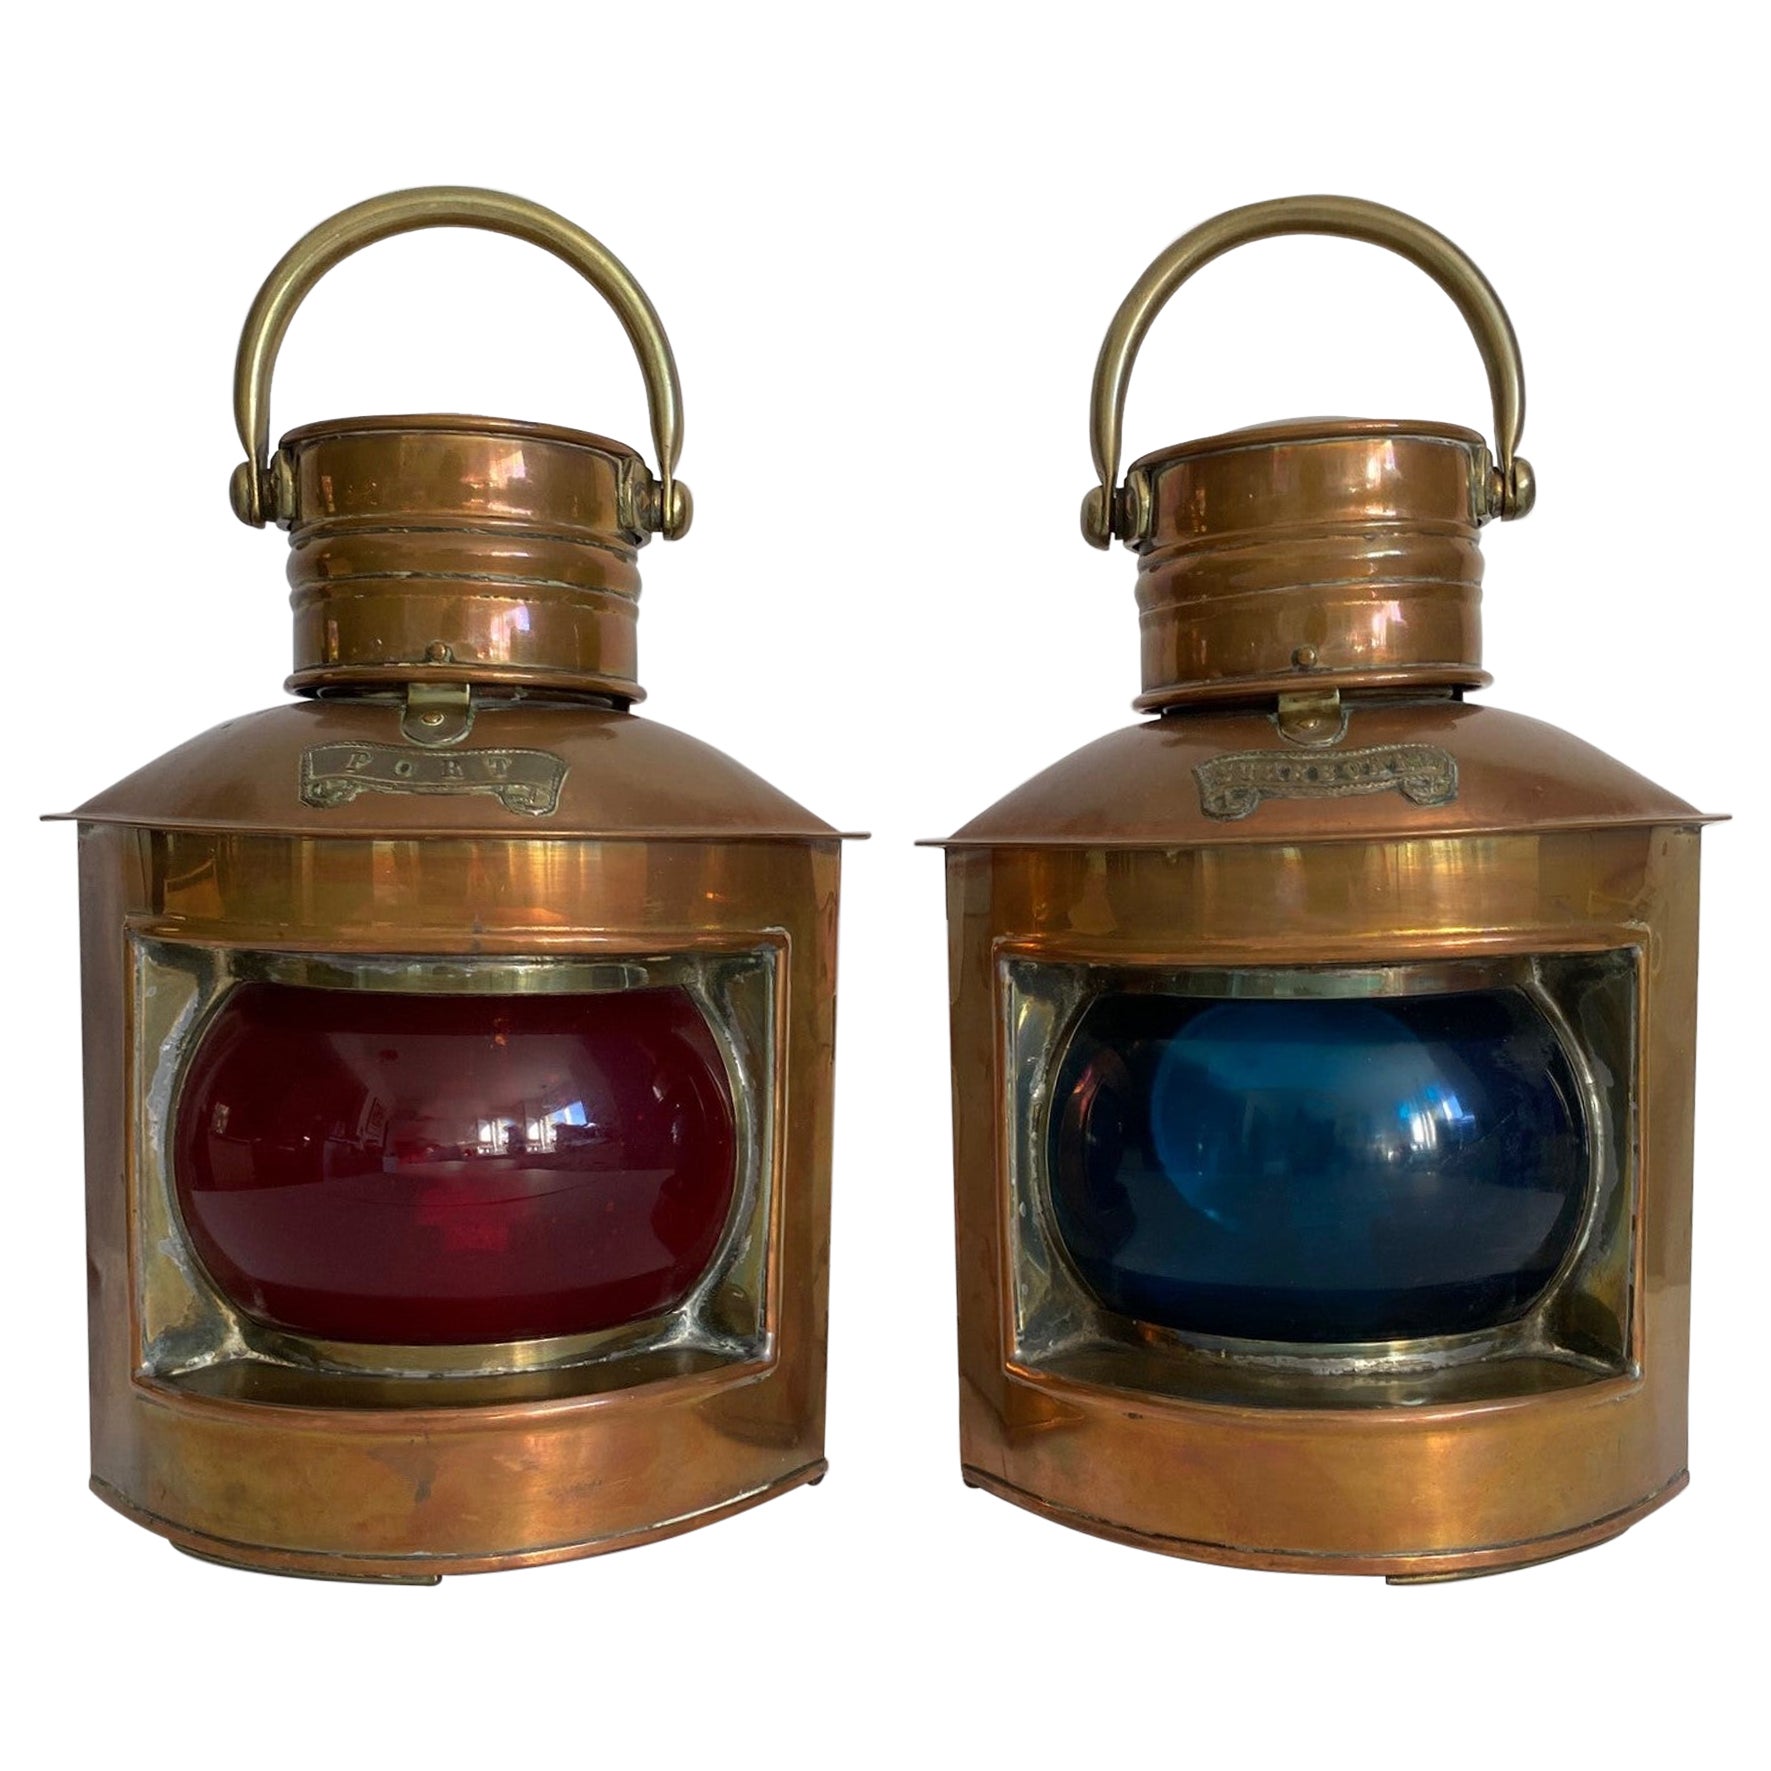 19th Century English Copper Ship Lanterns For Sale at 1stDibs